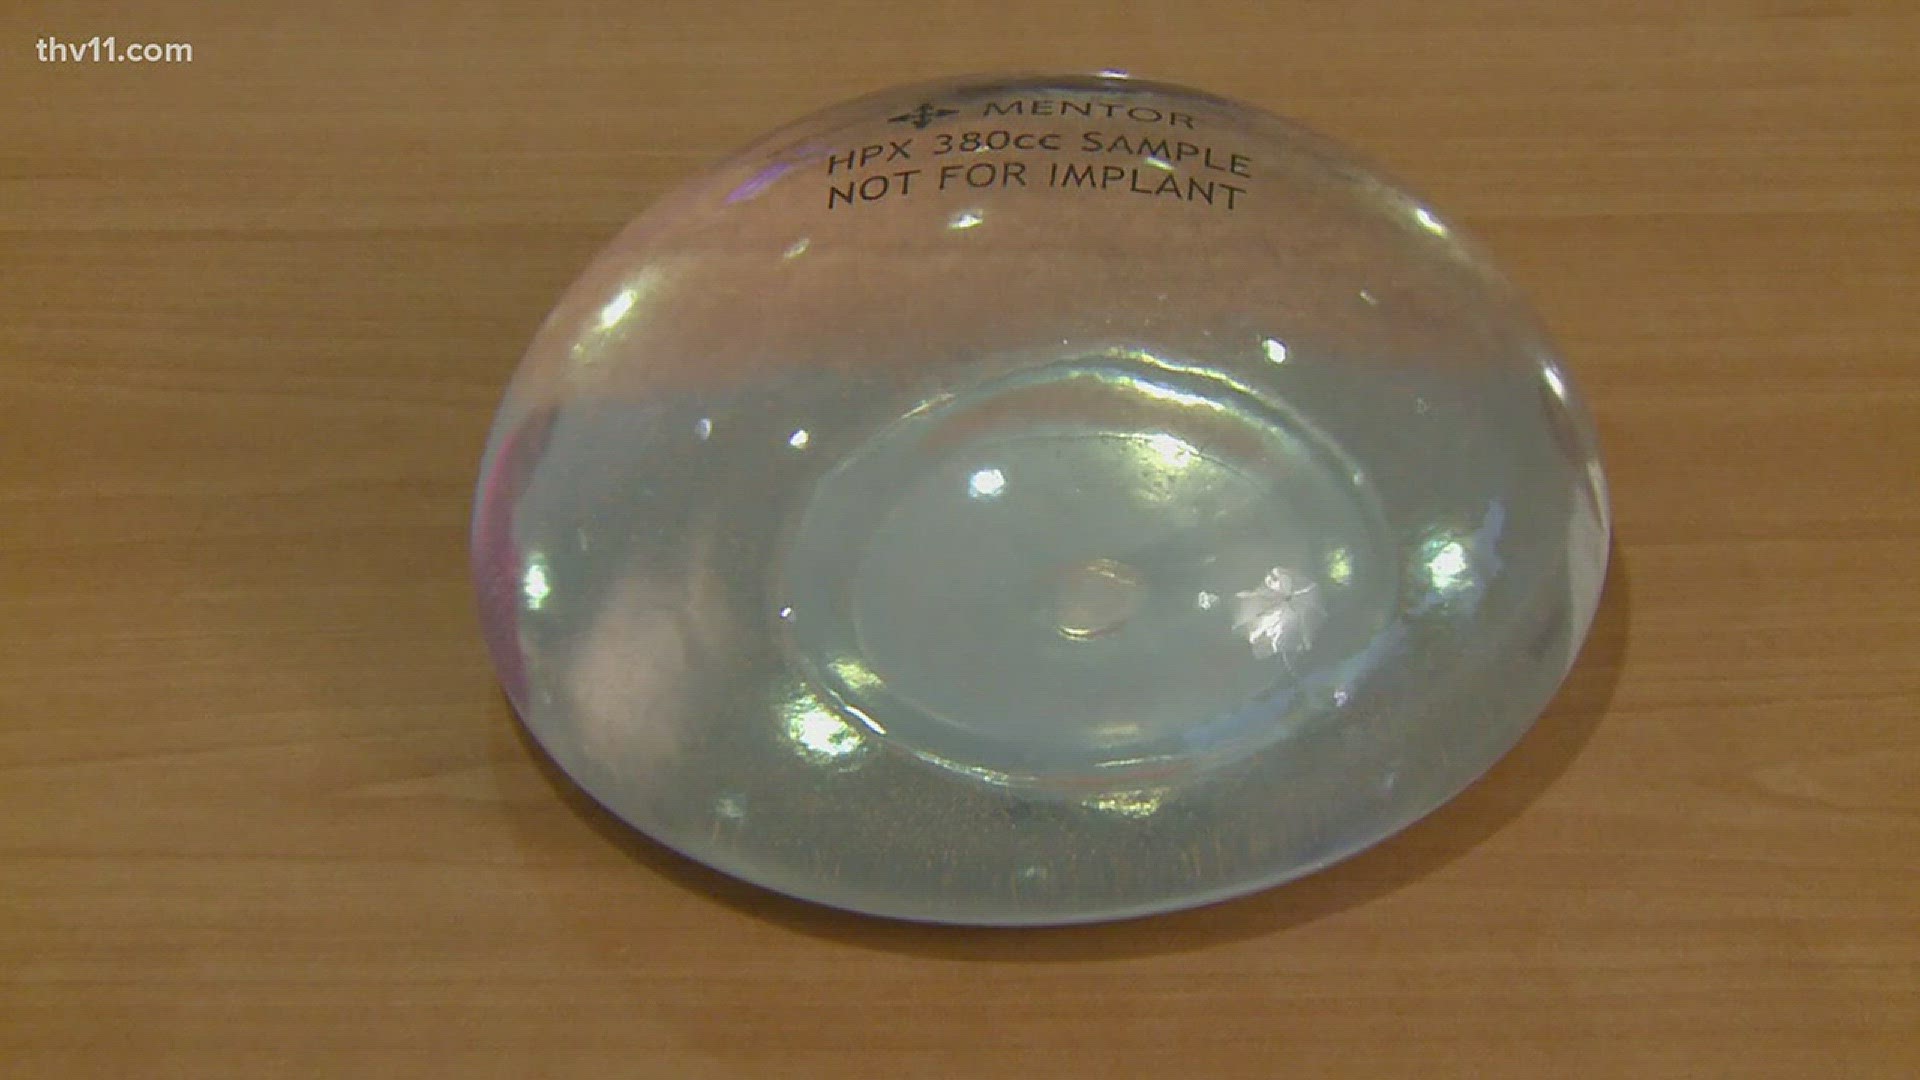 Women with breast implants may have cause for concern.